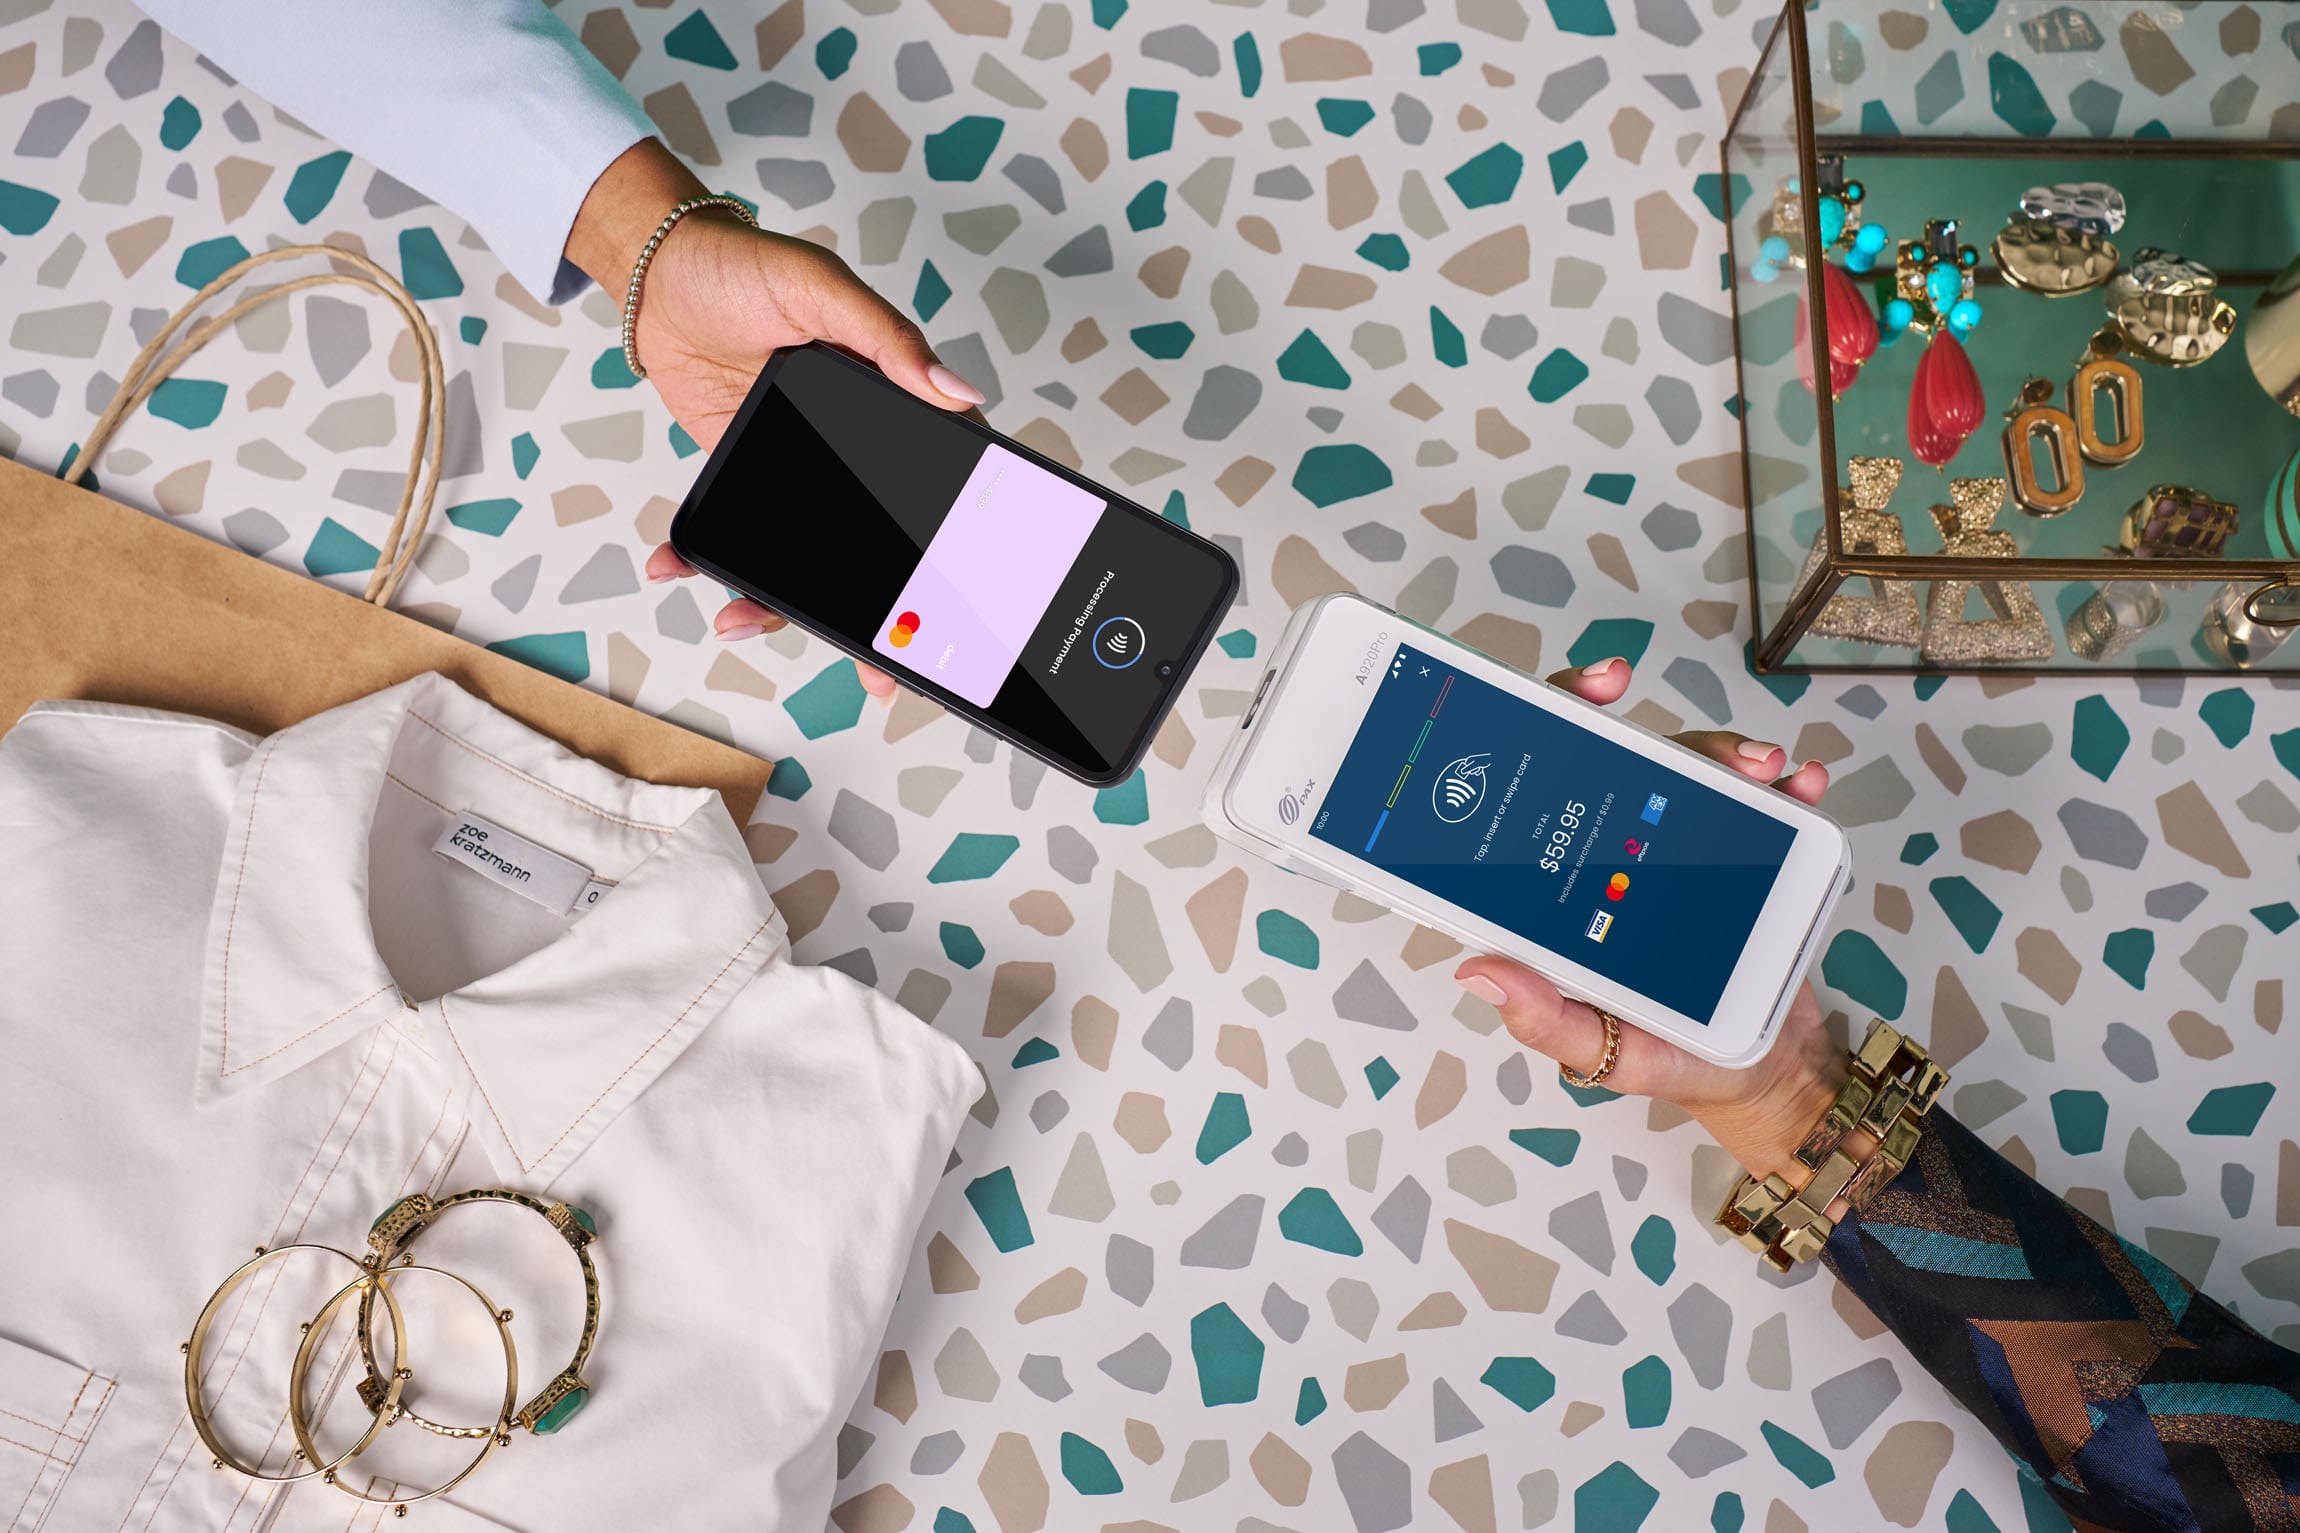 Phone tapping a Smartpay terminal over terrazzo counter with clothing and accessories around